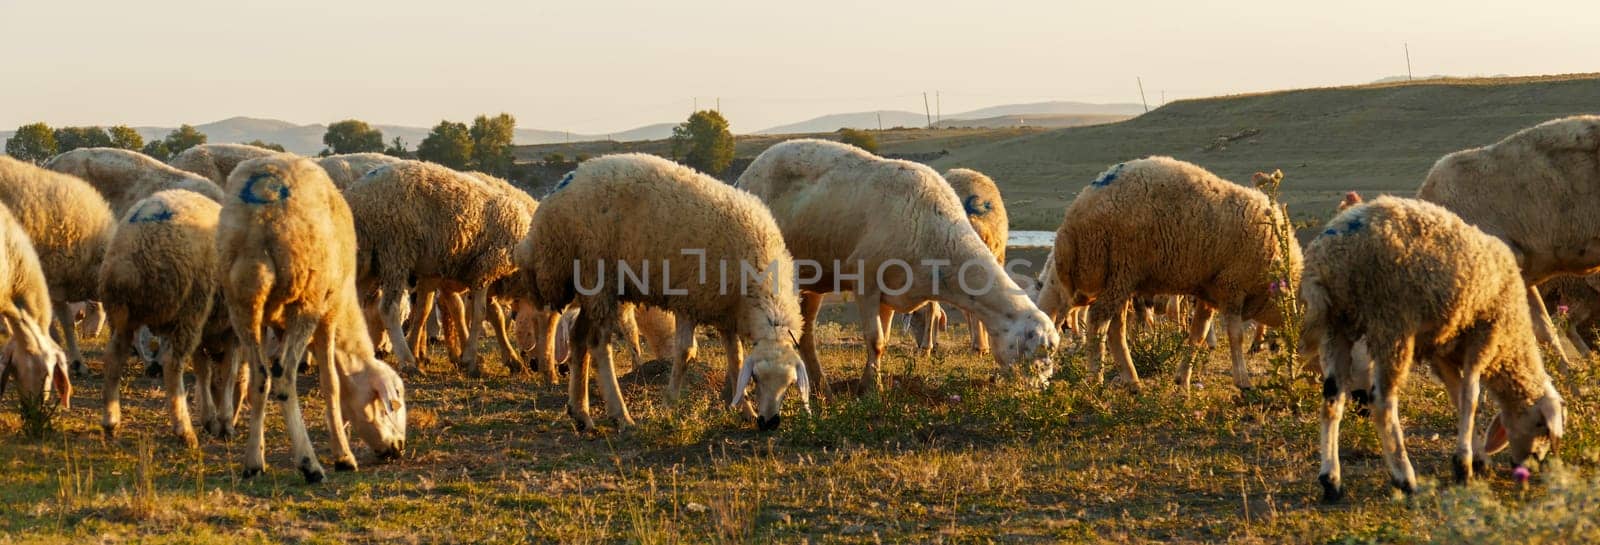 flock of sheep grazing in the field at sunset, sheep and lambs grazing in the open field, by nhatipoglu